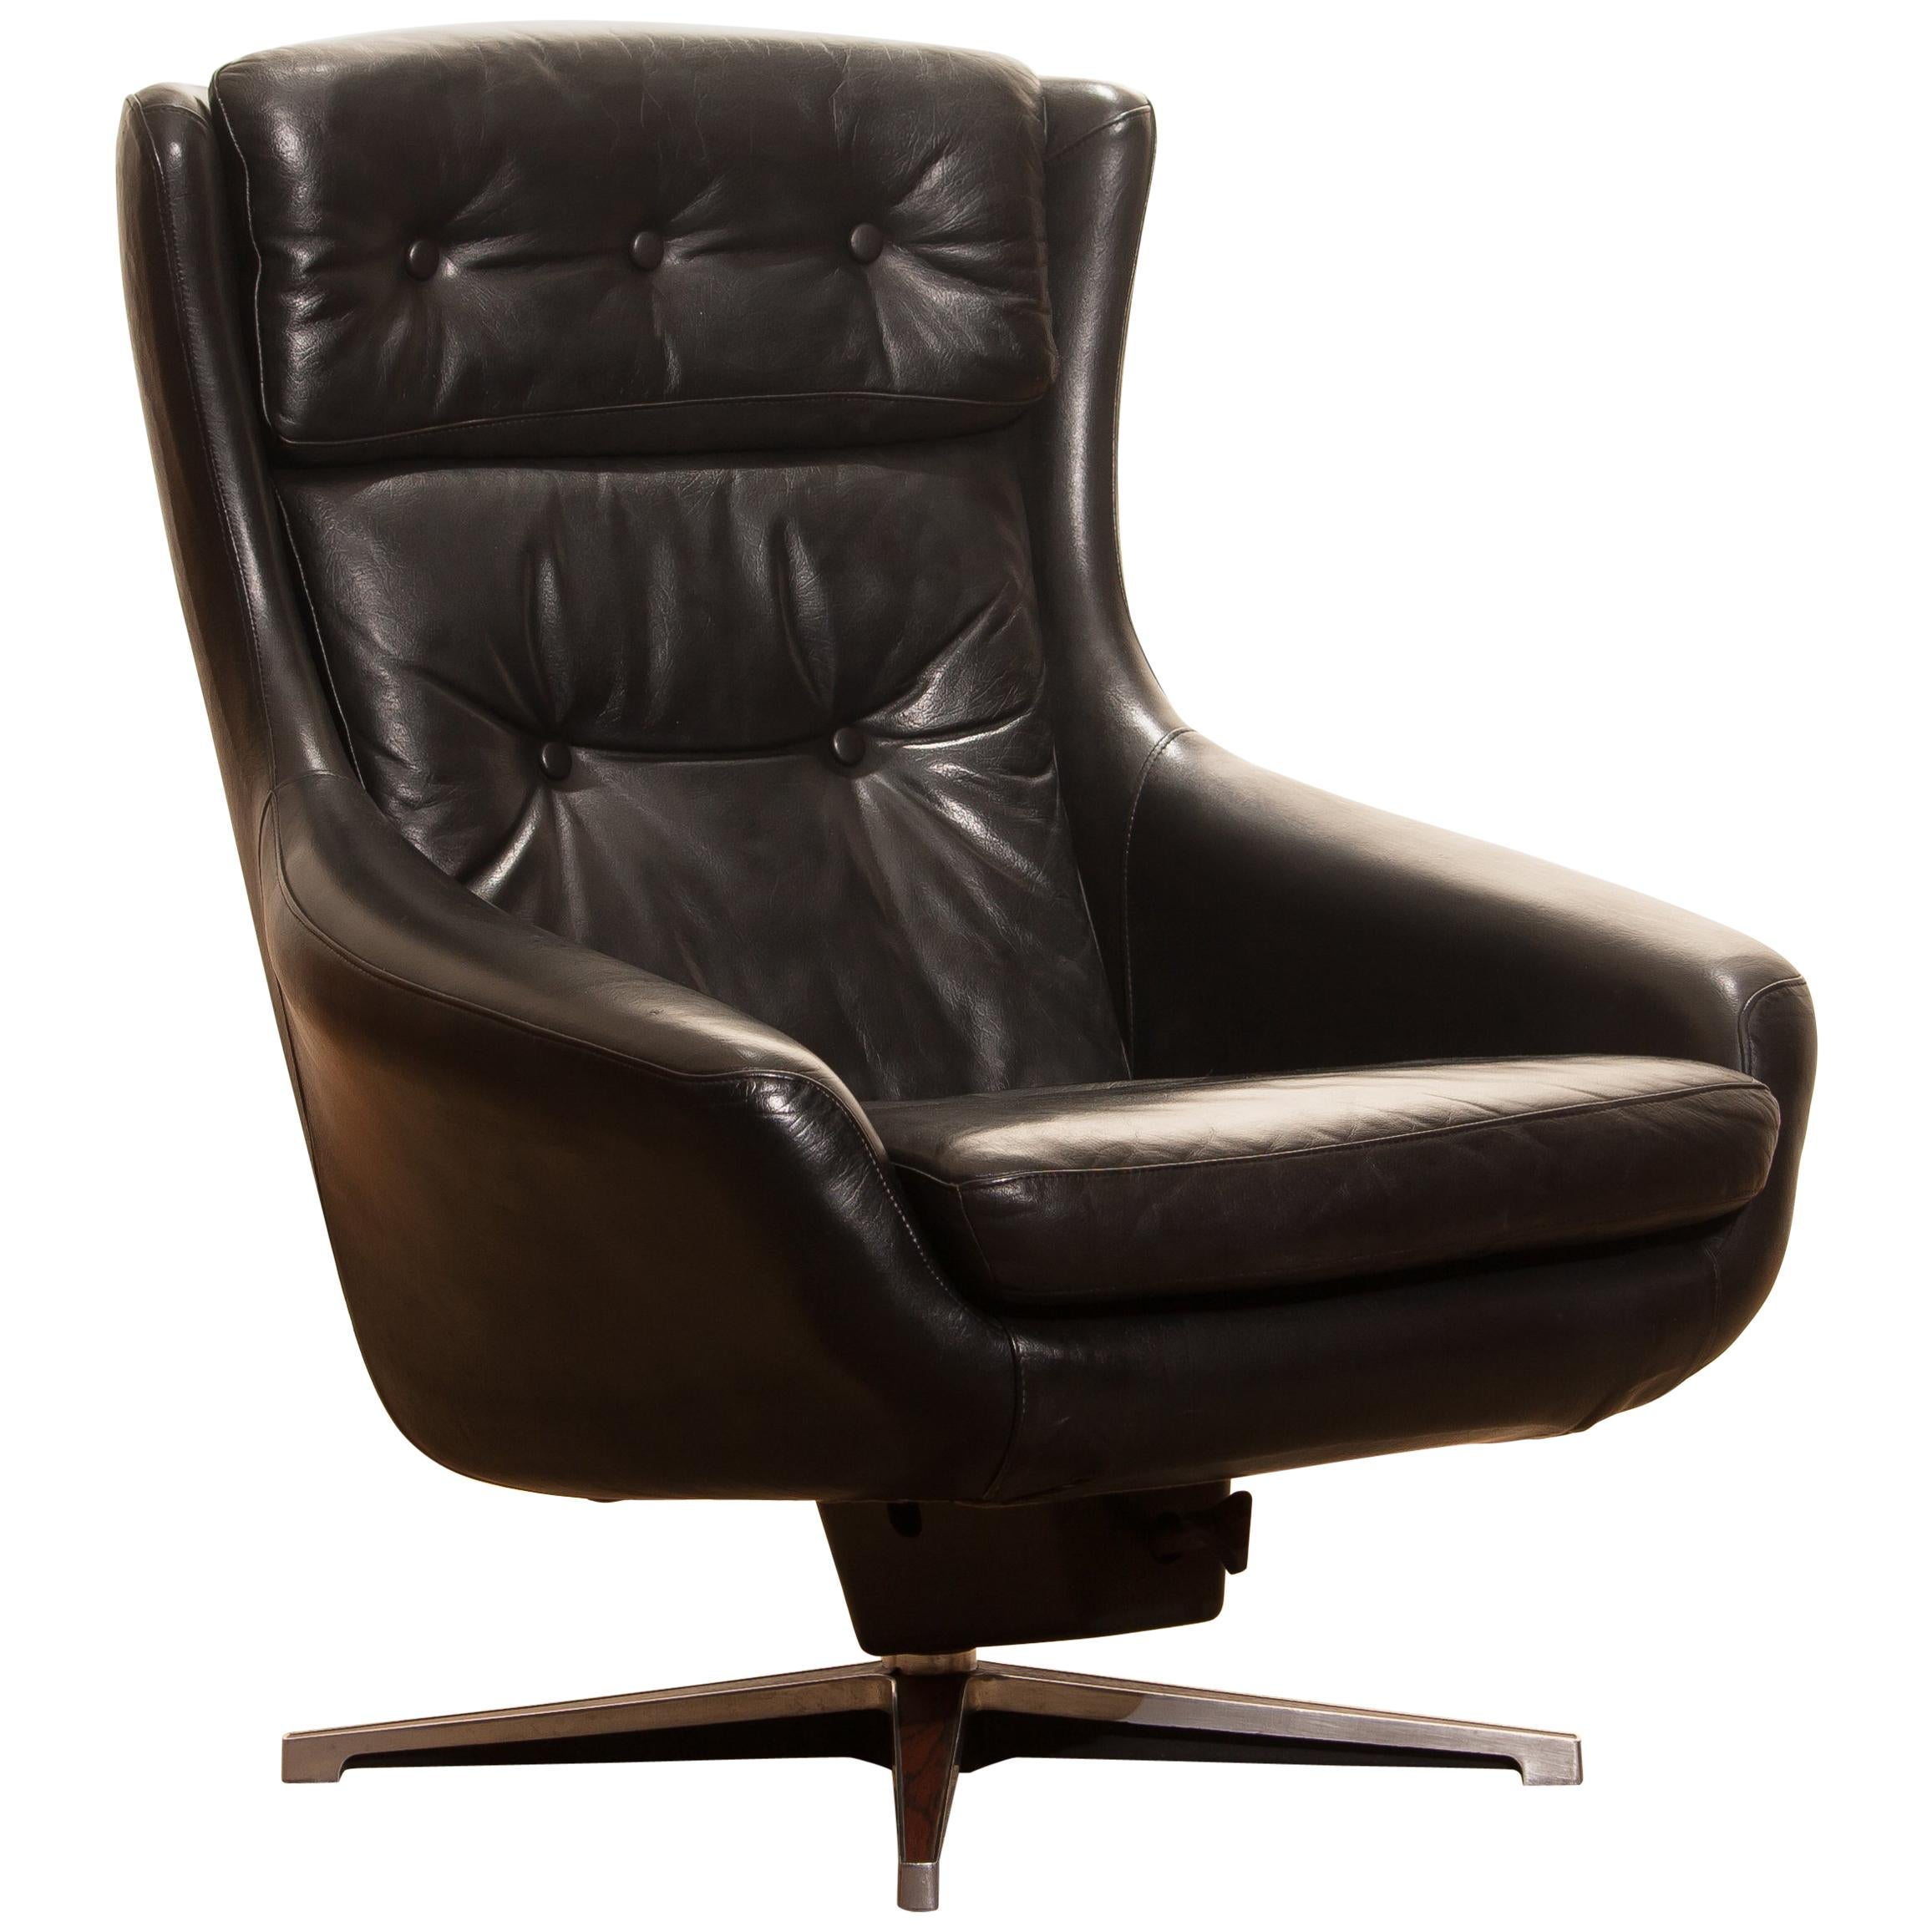 1960s, Black Leather Swivel Rocking Lounge Chair by Lennart Bender